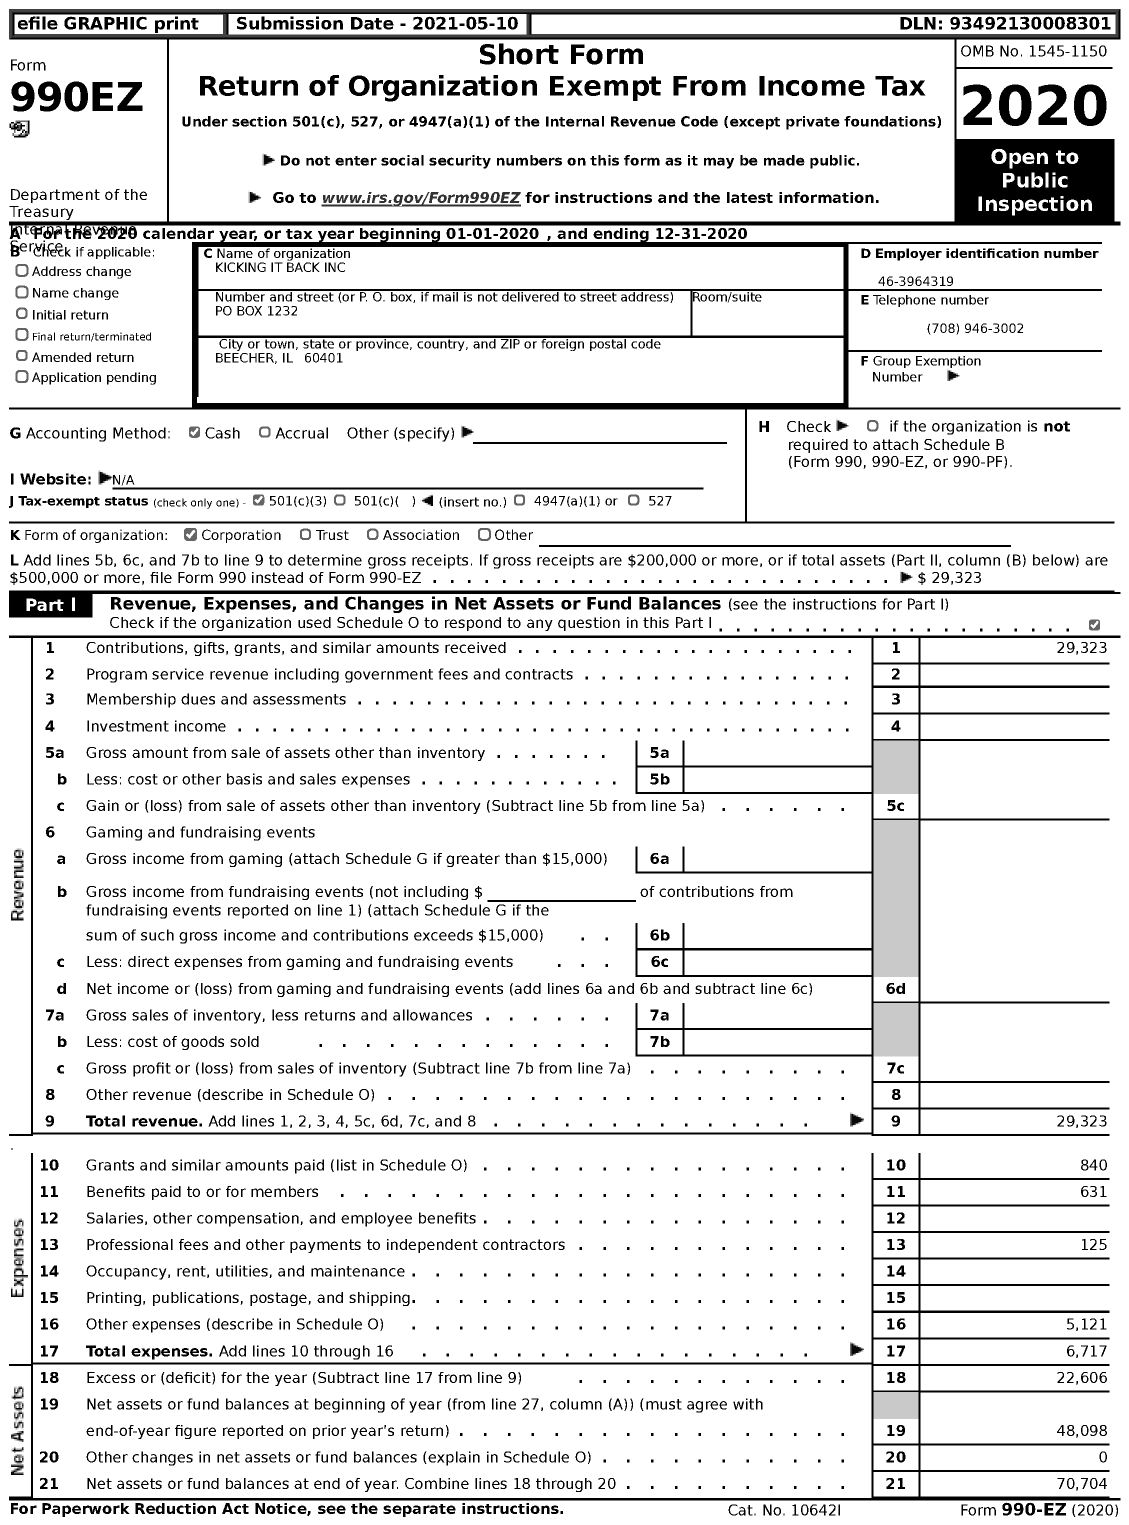 Image of first page of 2020 Form 990EZ for Kicking It Back